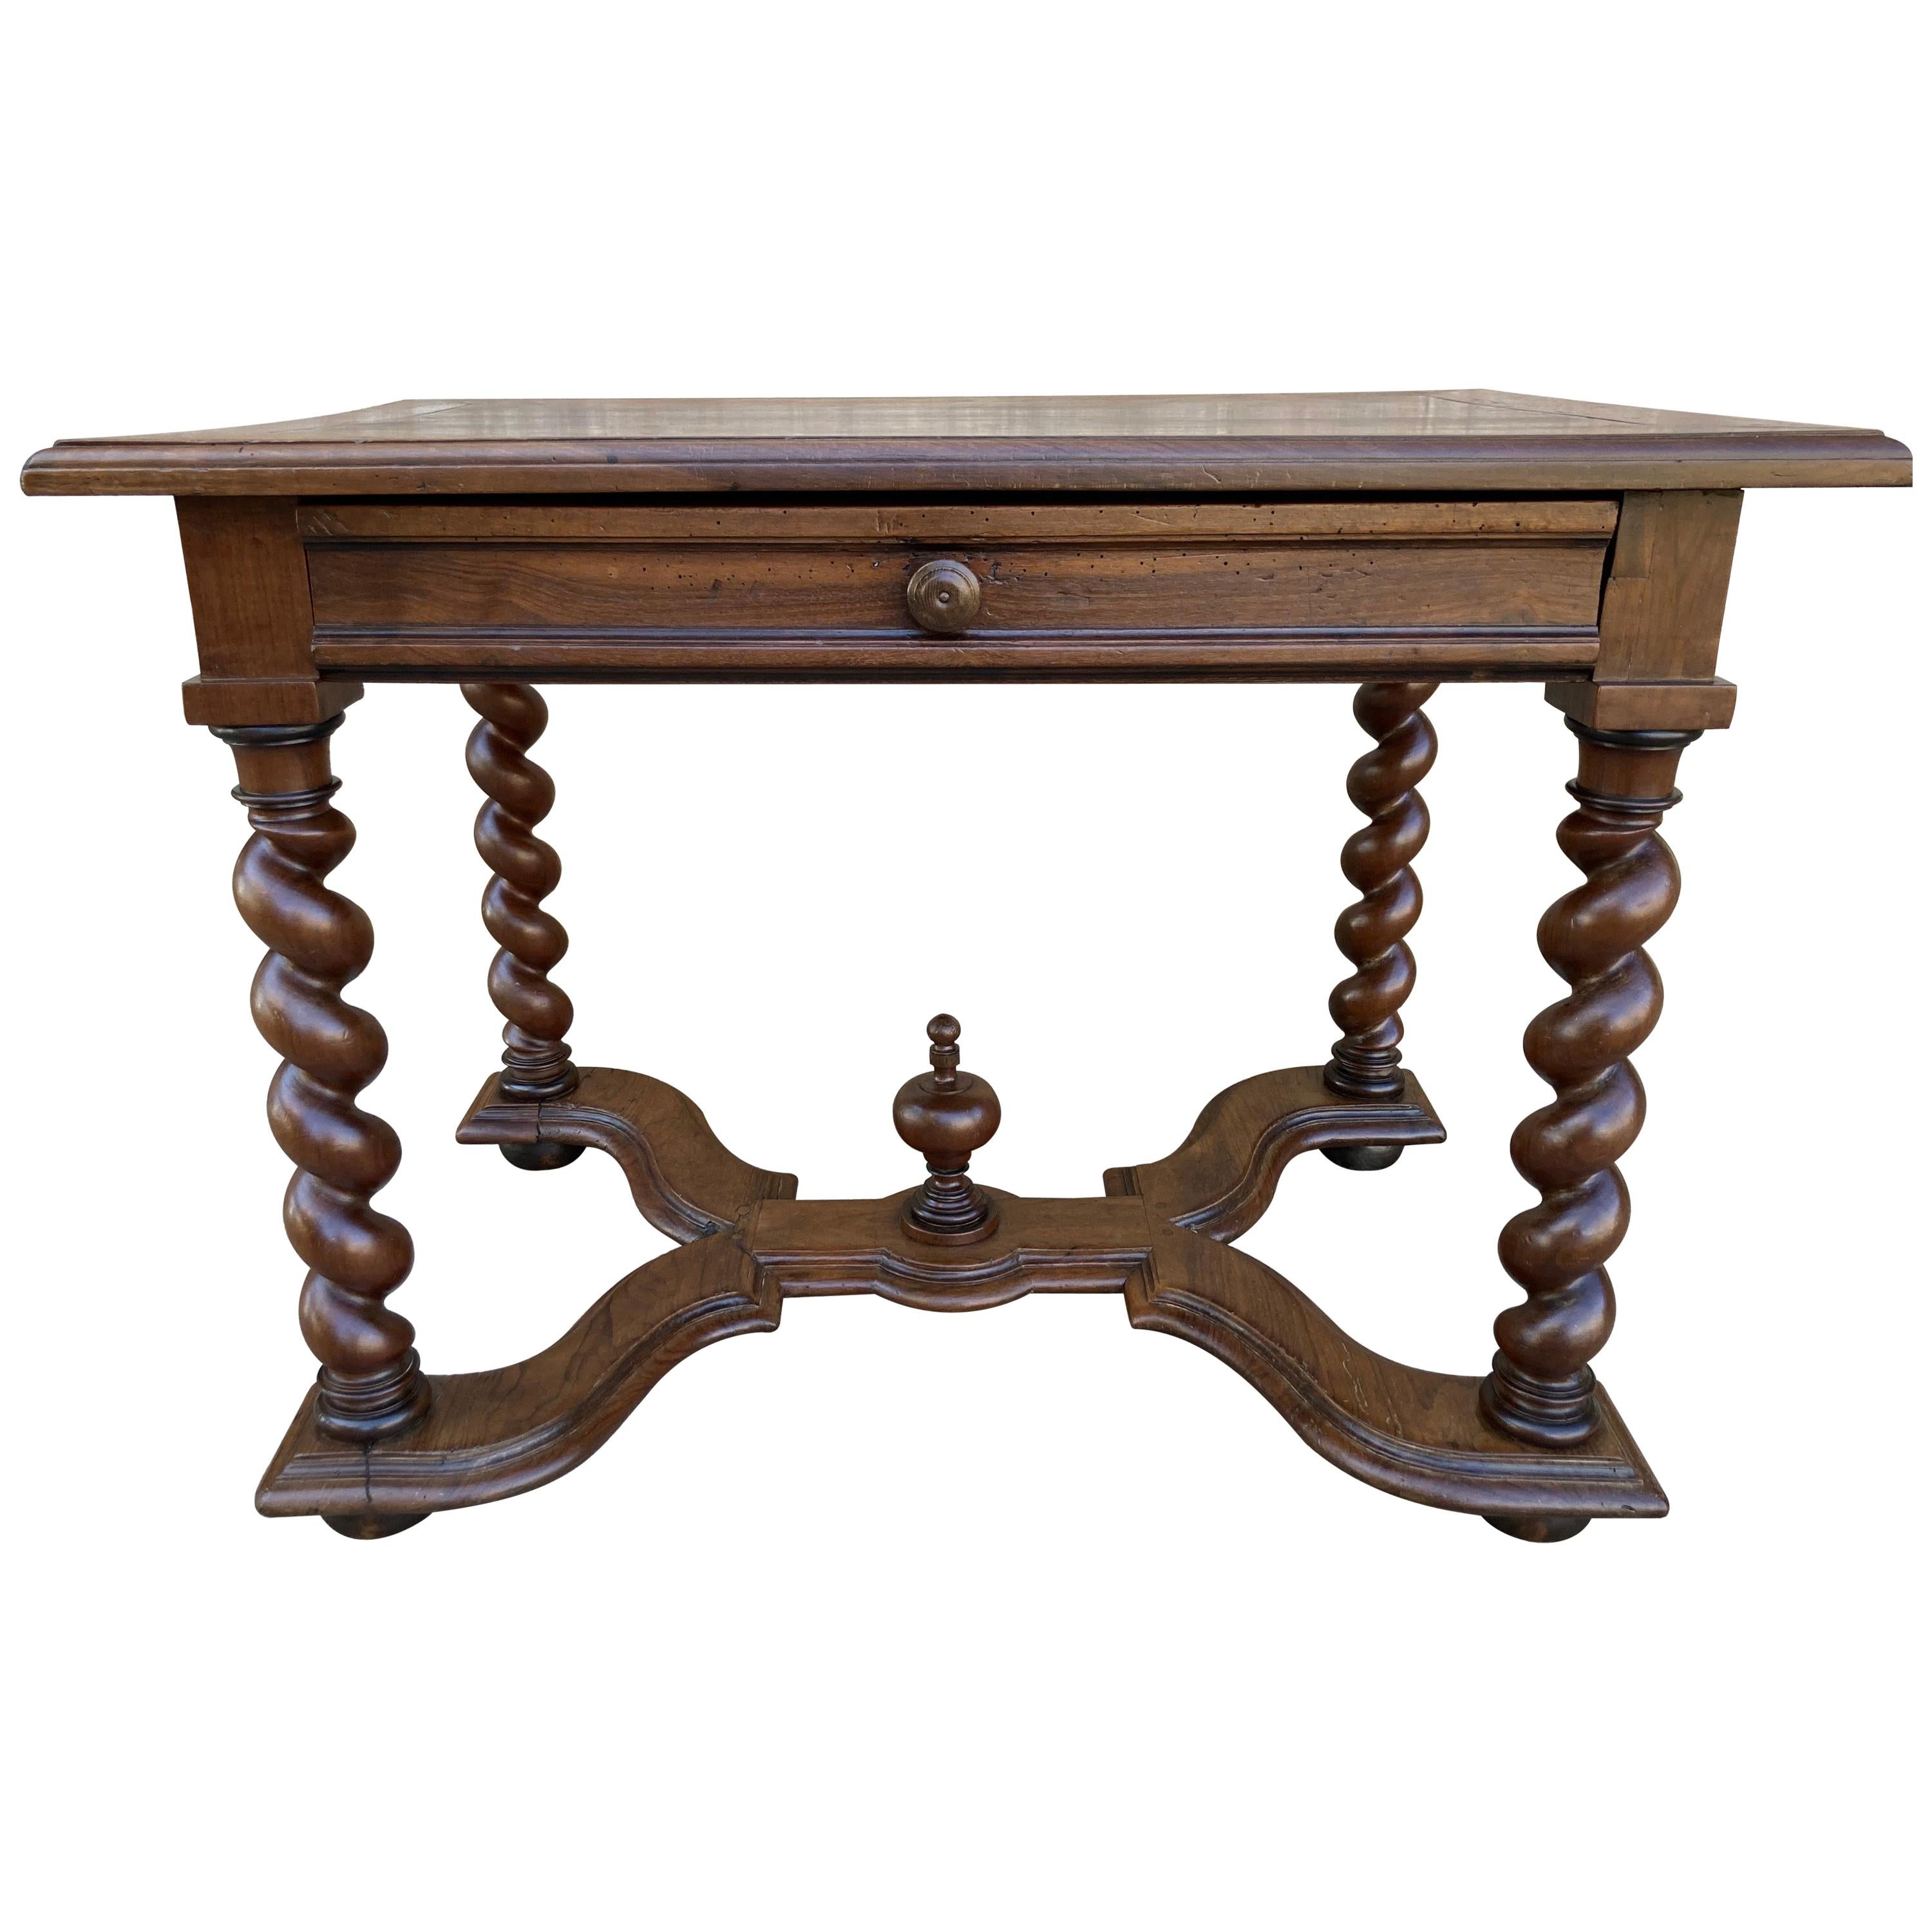 18th C. Walnut Table / Desk with Twisted Legs